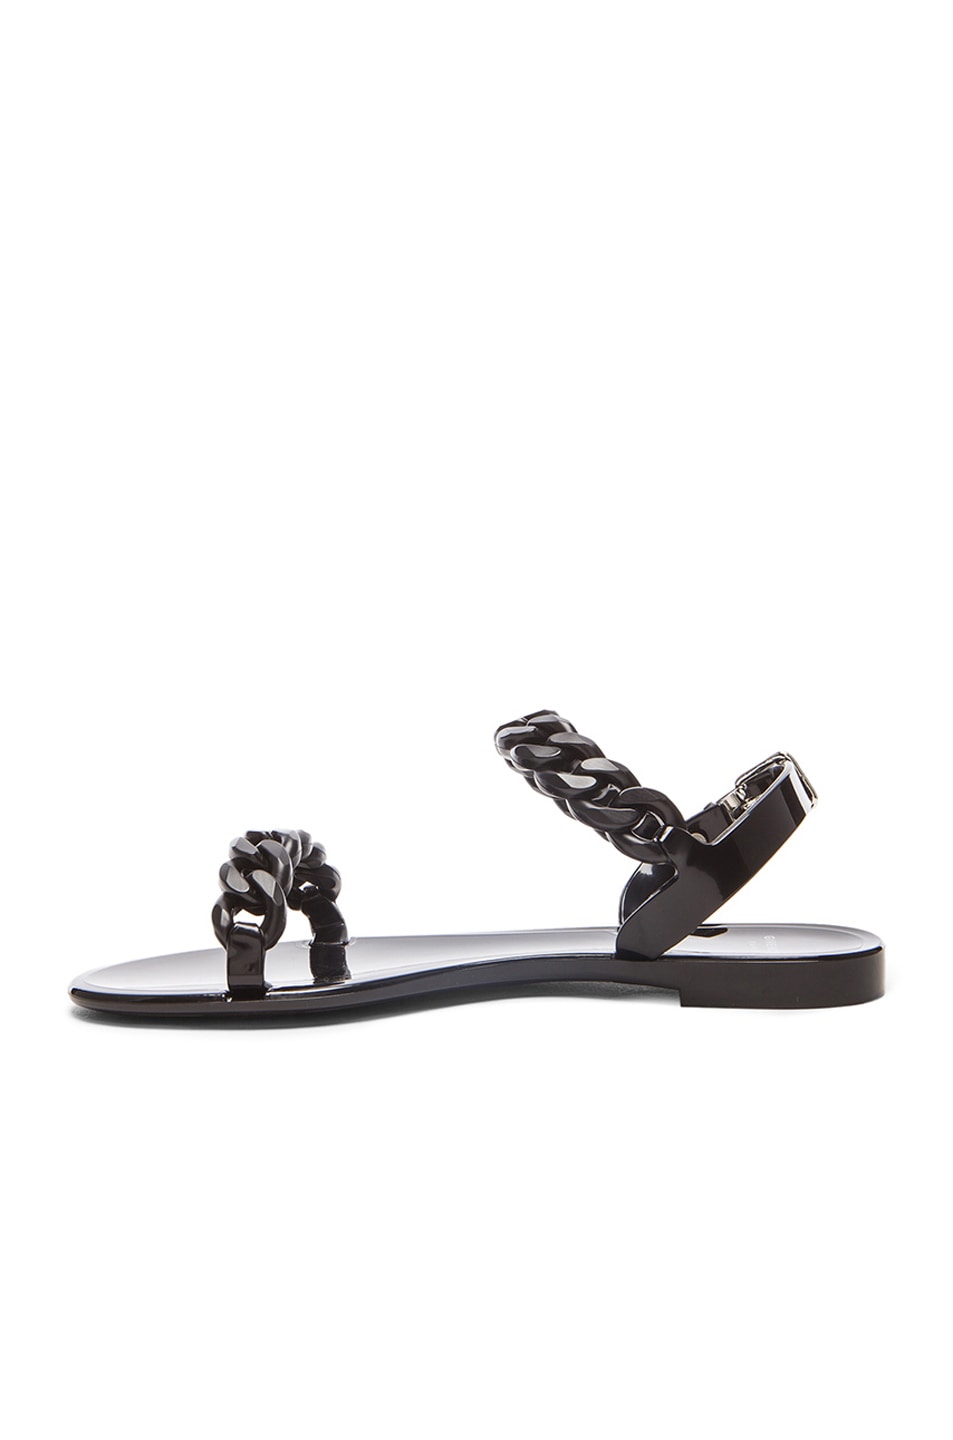 GIVENCHY CHAIN JELLY SANDALS, BLACK | ModeSens